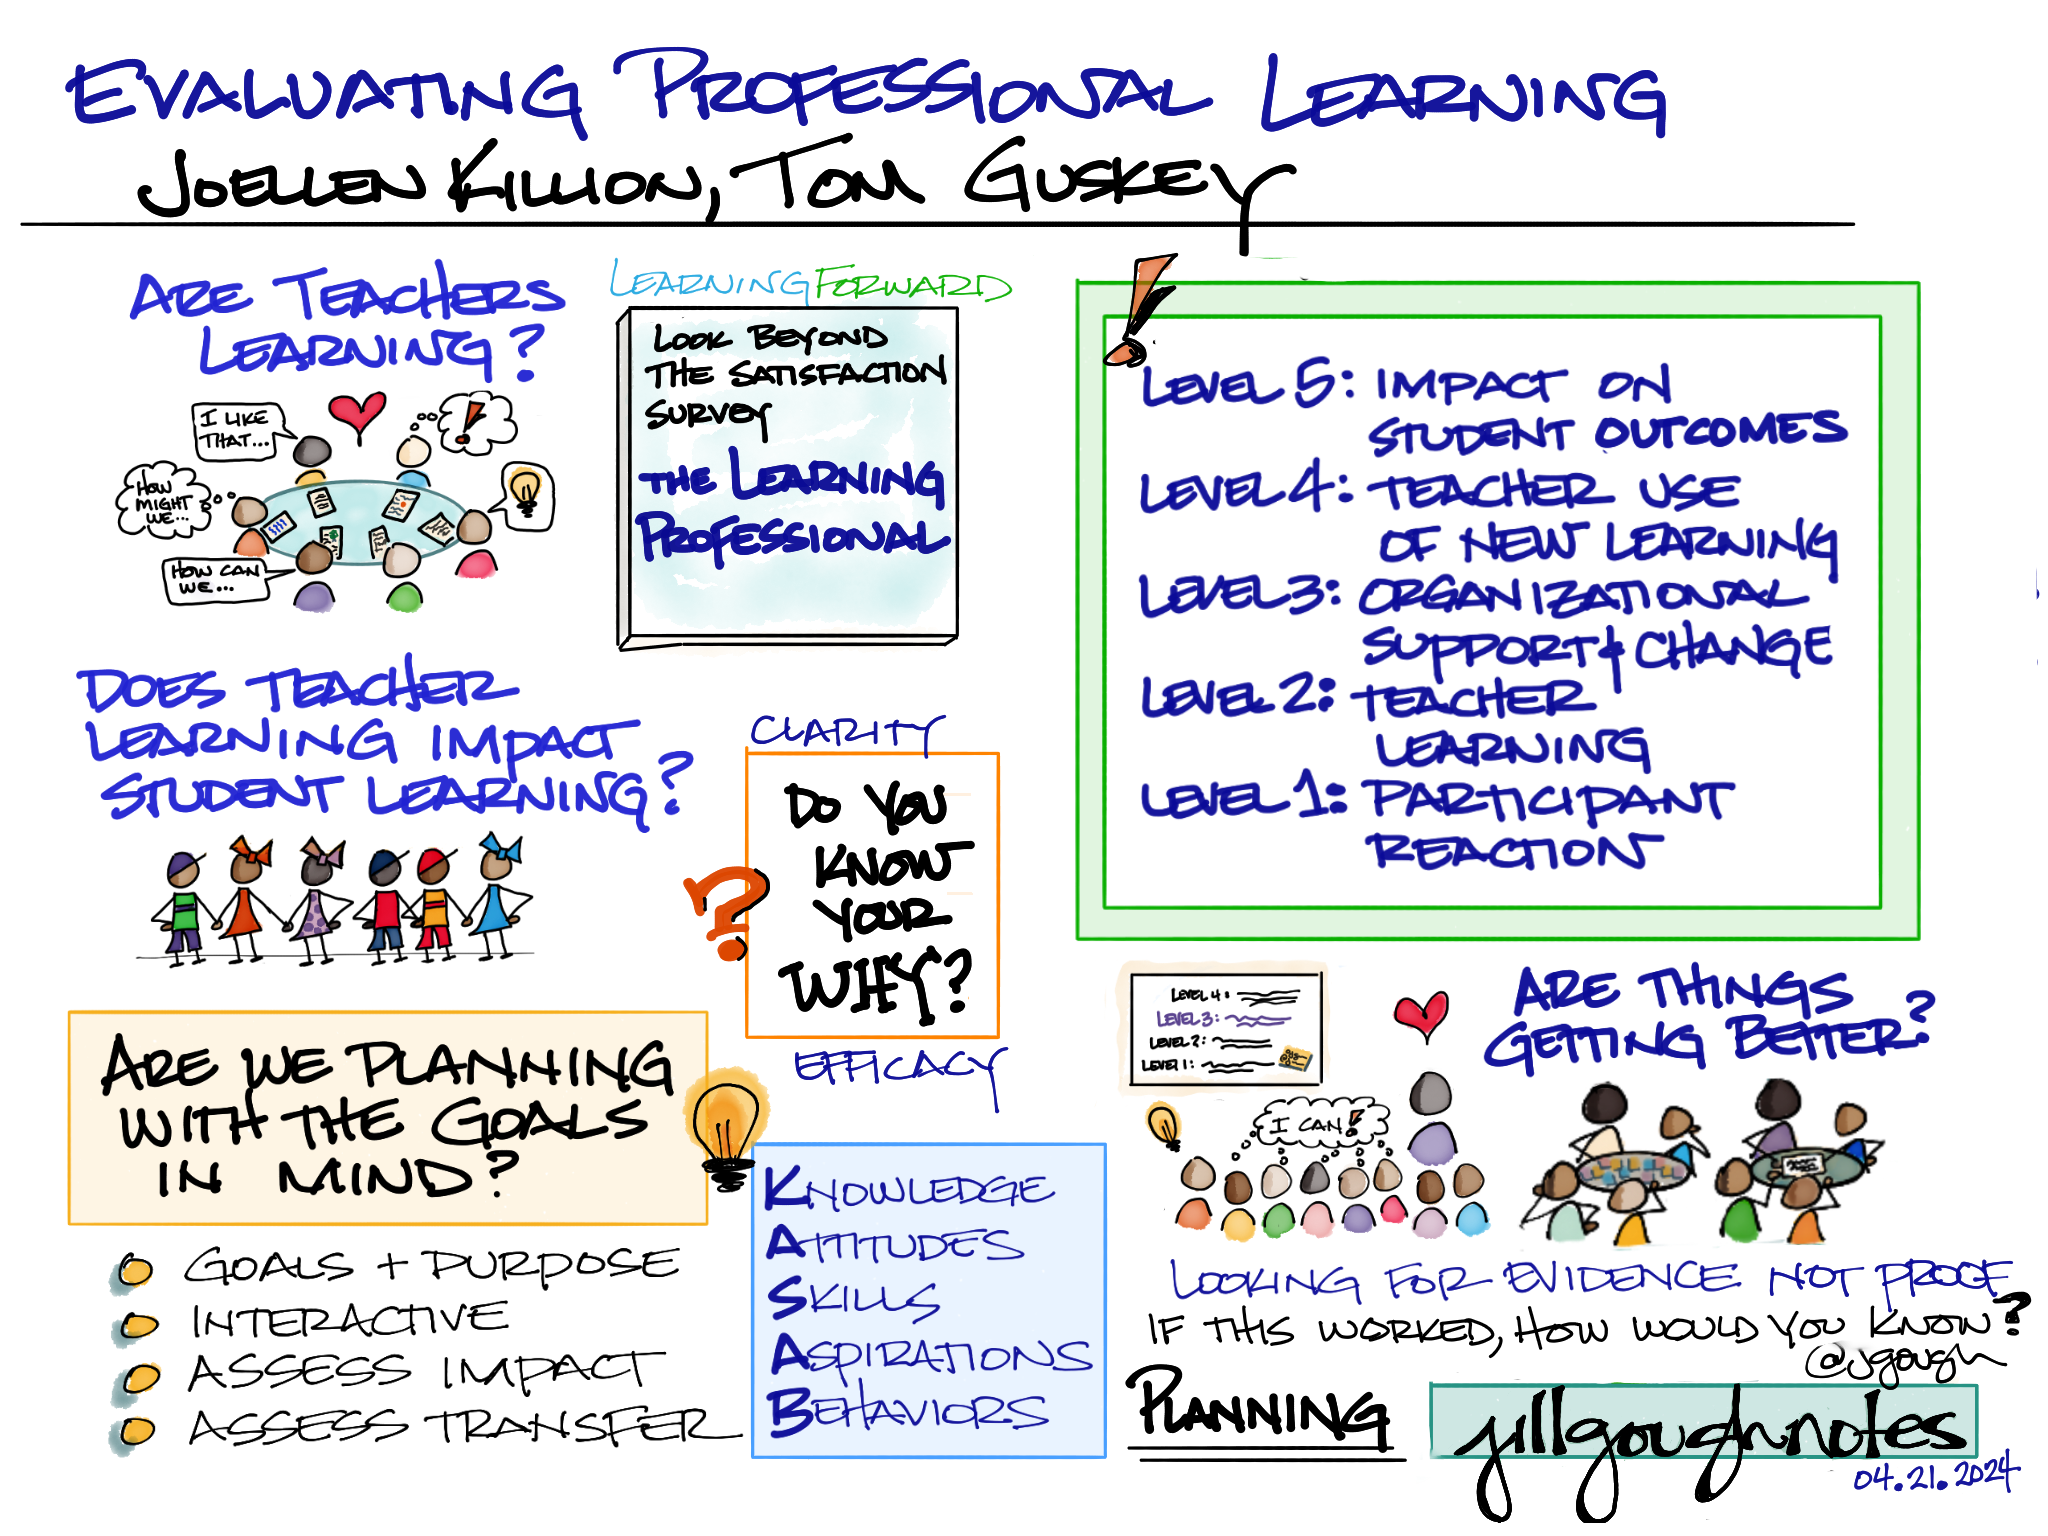 Evaluating Professional Learning from @LearningForward with Tom Guskey, Joellen Killion